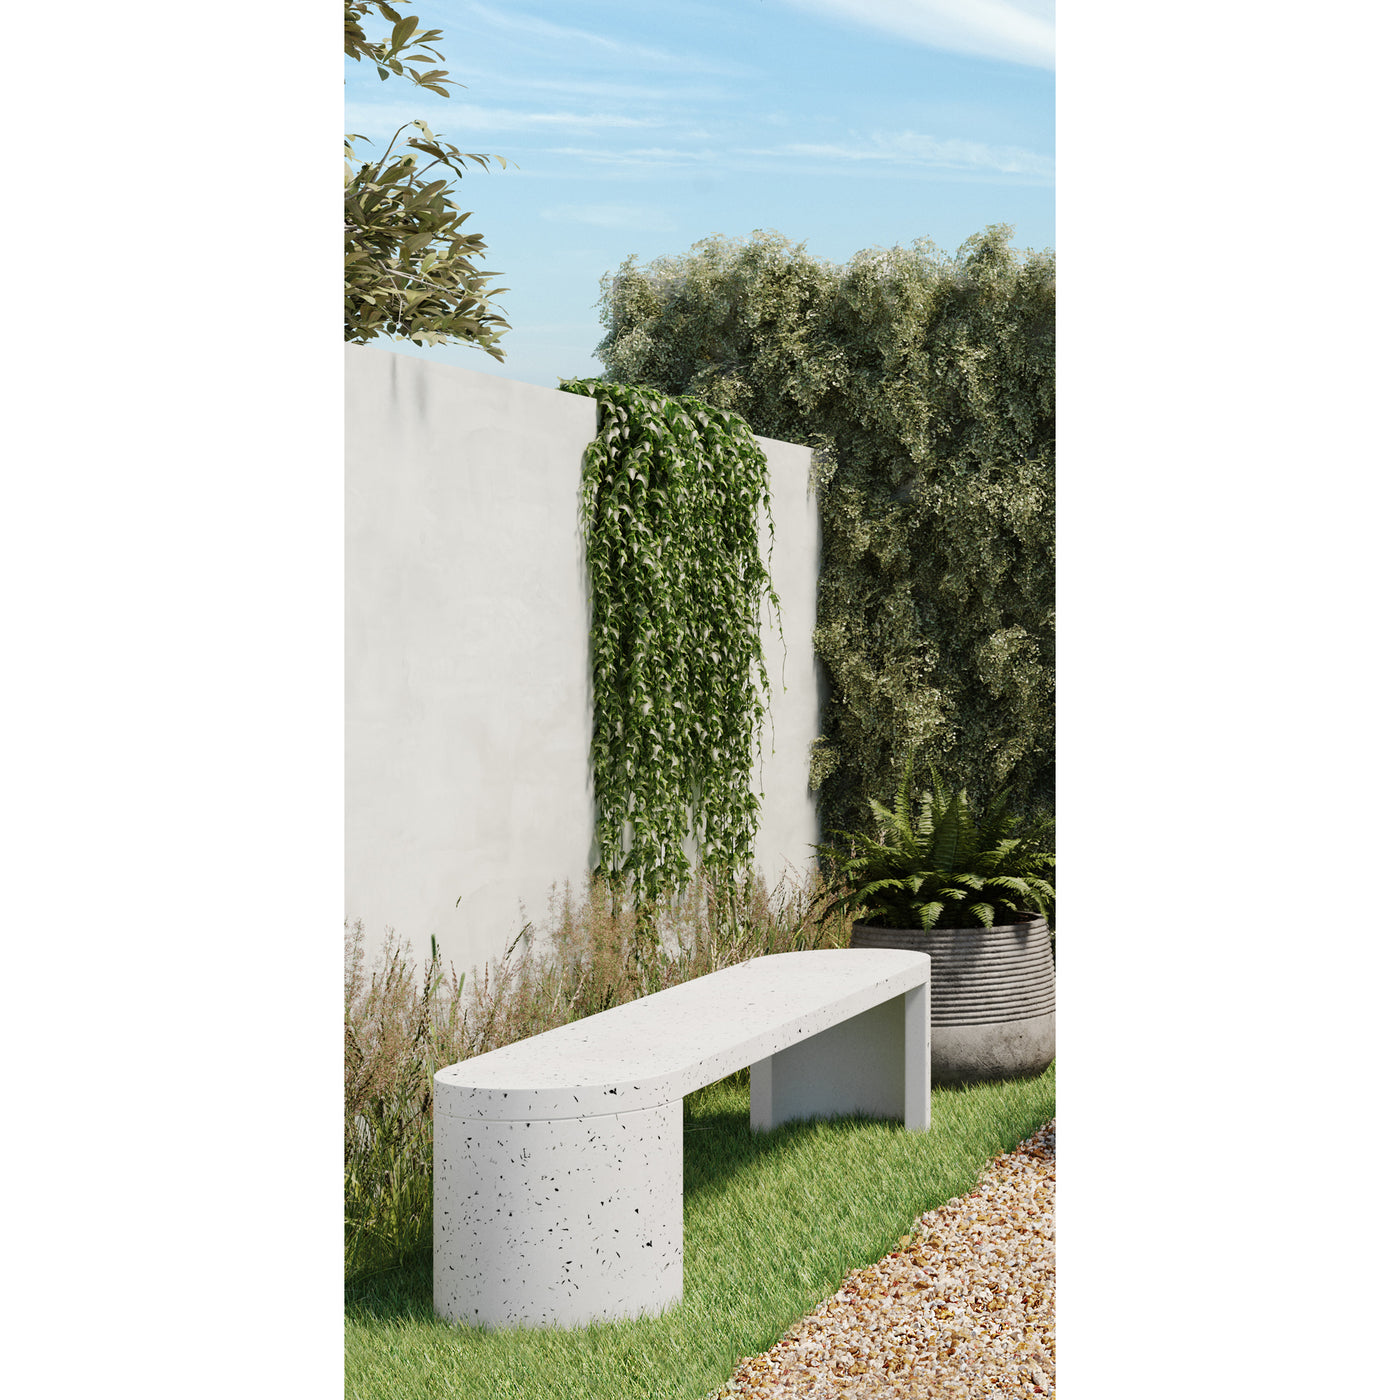 Perfect for an open-plan garden or patio setting, this spacious bench’s rounded geometric shape contrasts so well within a...